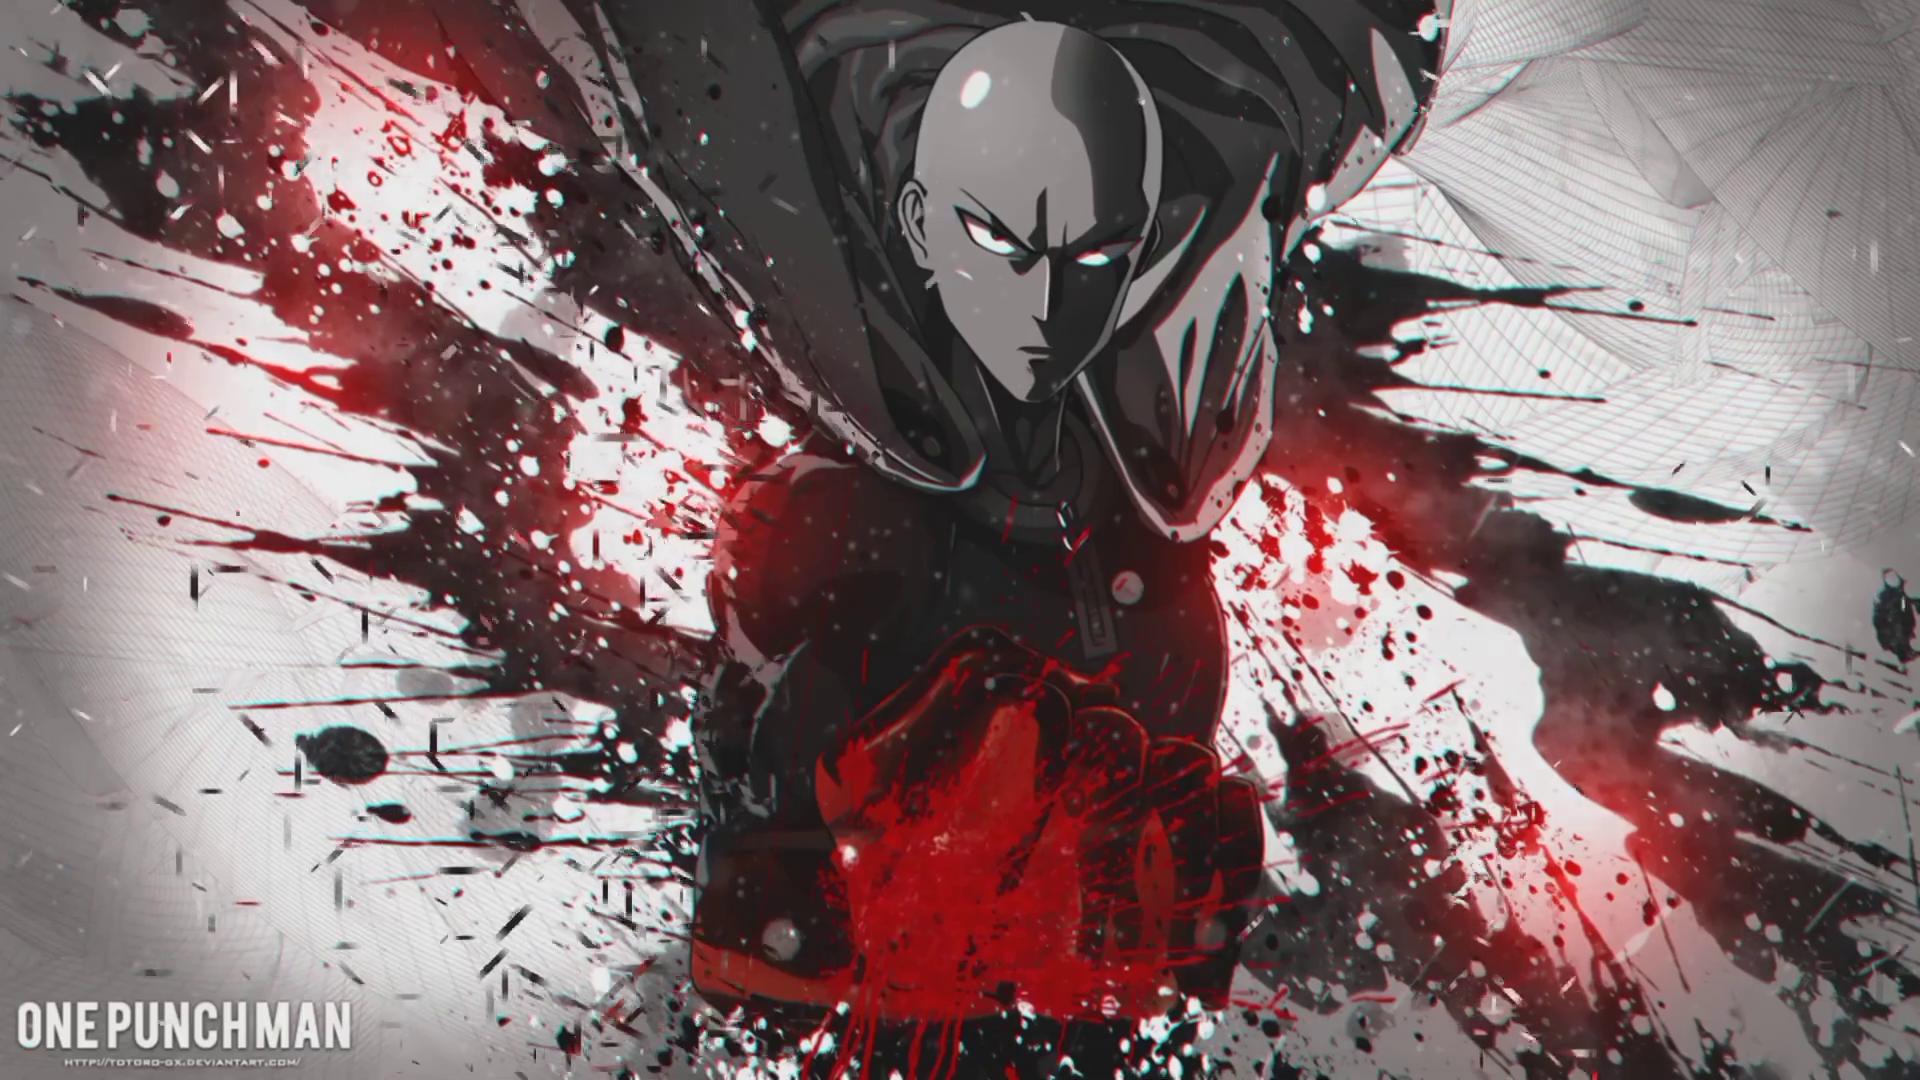 One Punch Man Wallpapers - Apps on Google Play